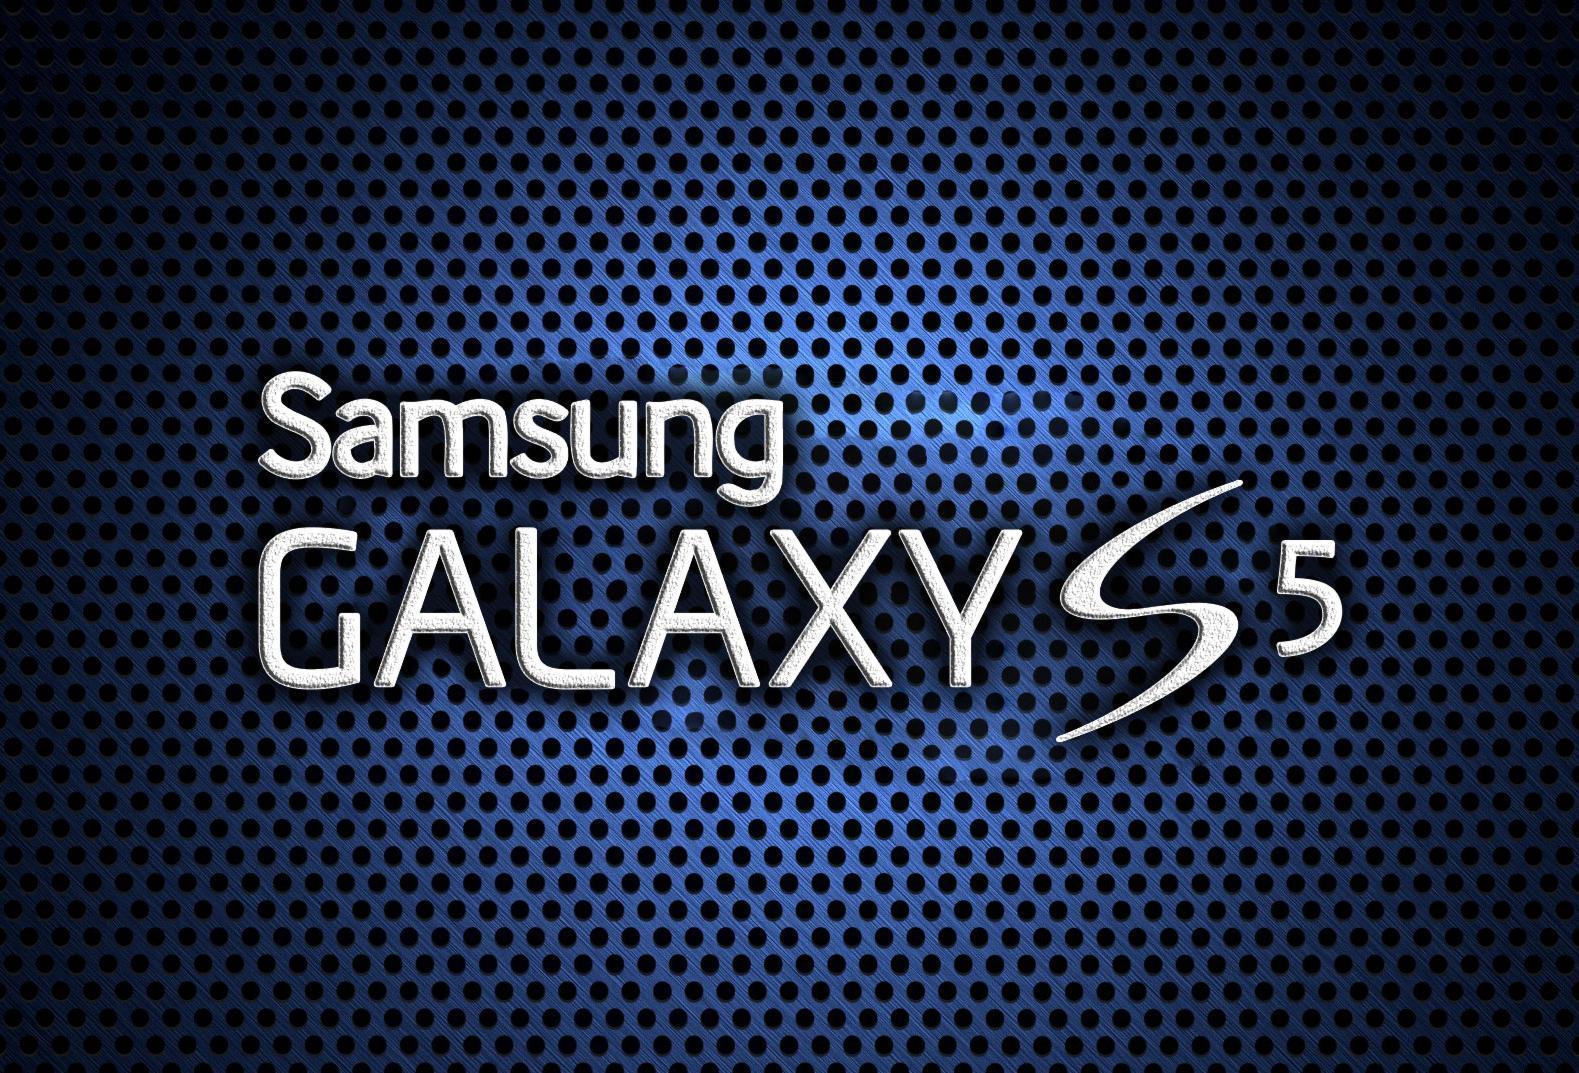 Samsung Galaxy S5 Logo - Samsung Putting the Galaxy S5, Gear 2, and Gear Fit on Preview in ...